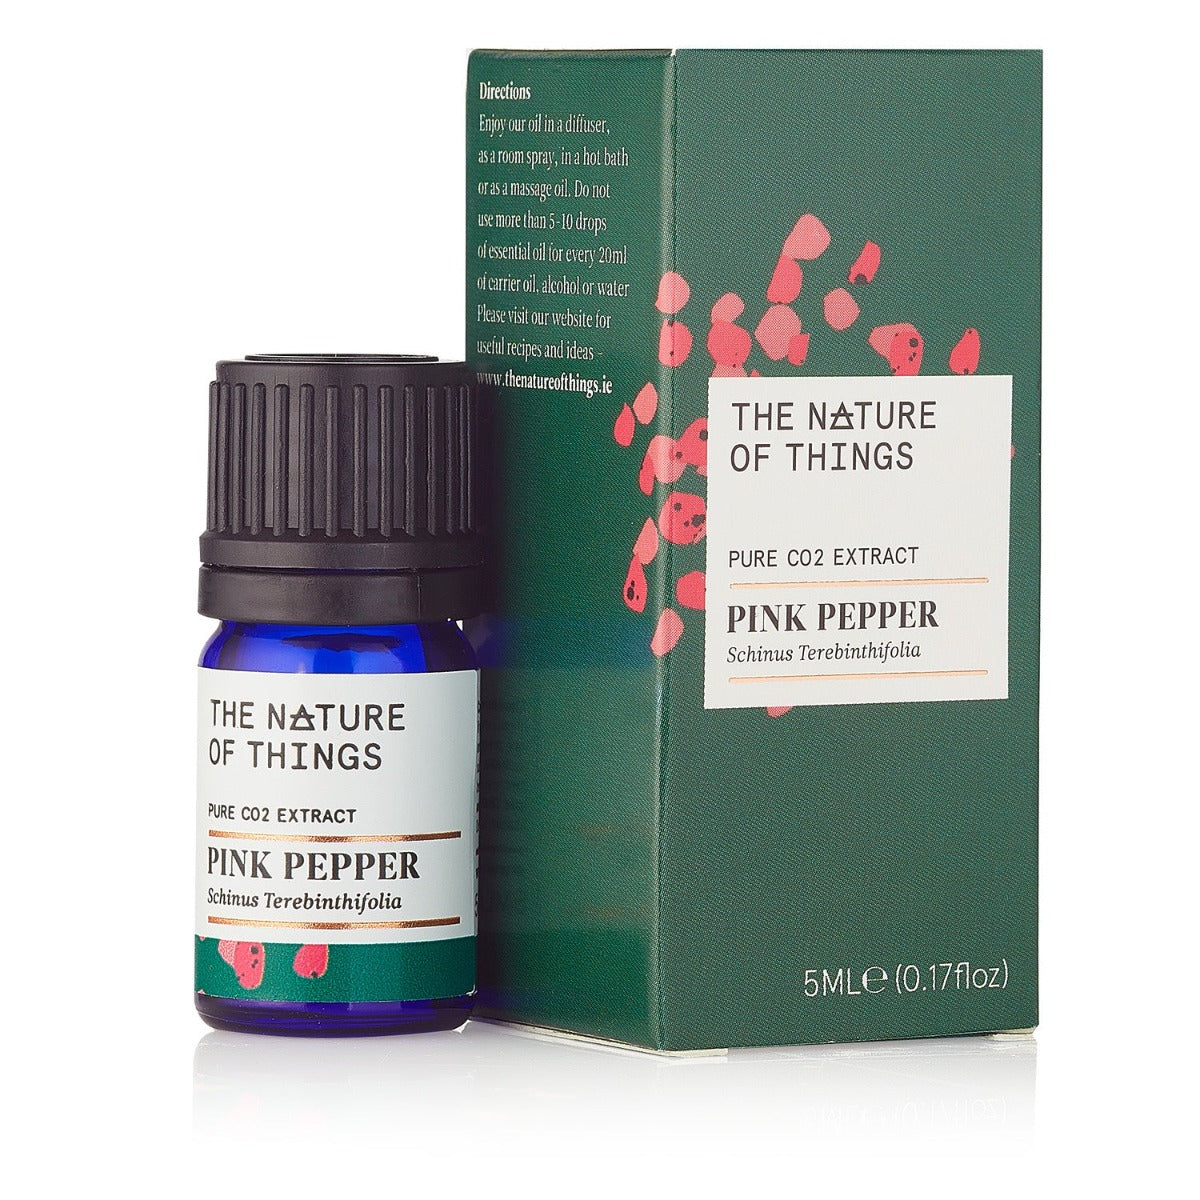 Pink Pepper CO2 Extract from The Nature of Things